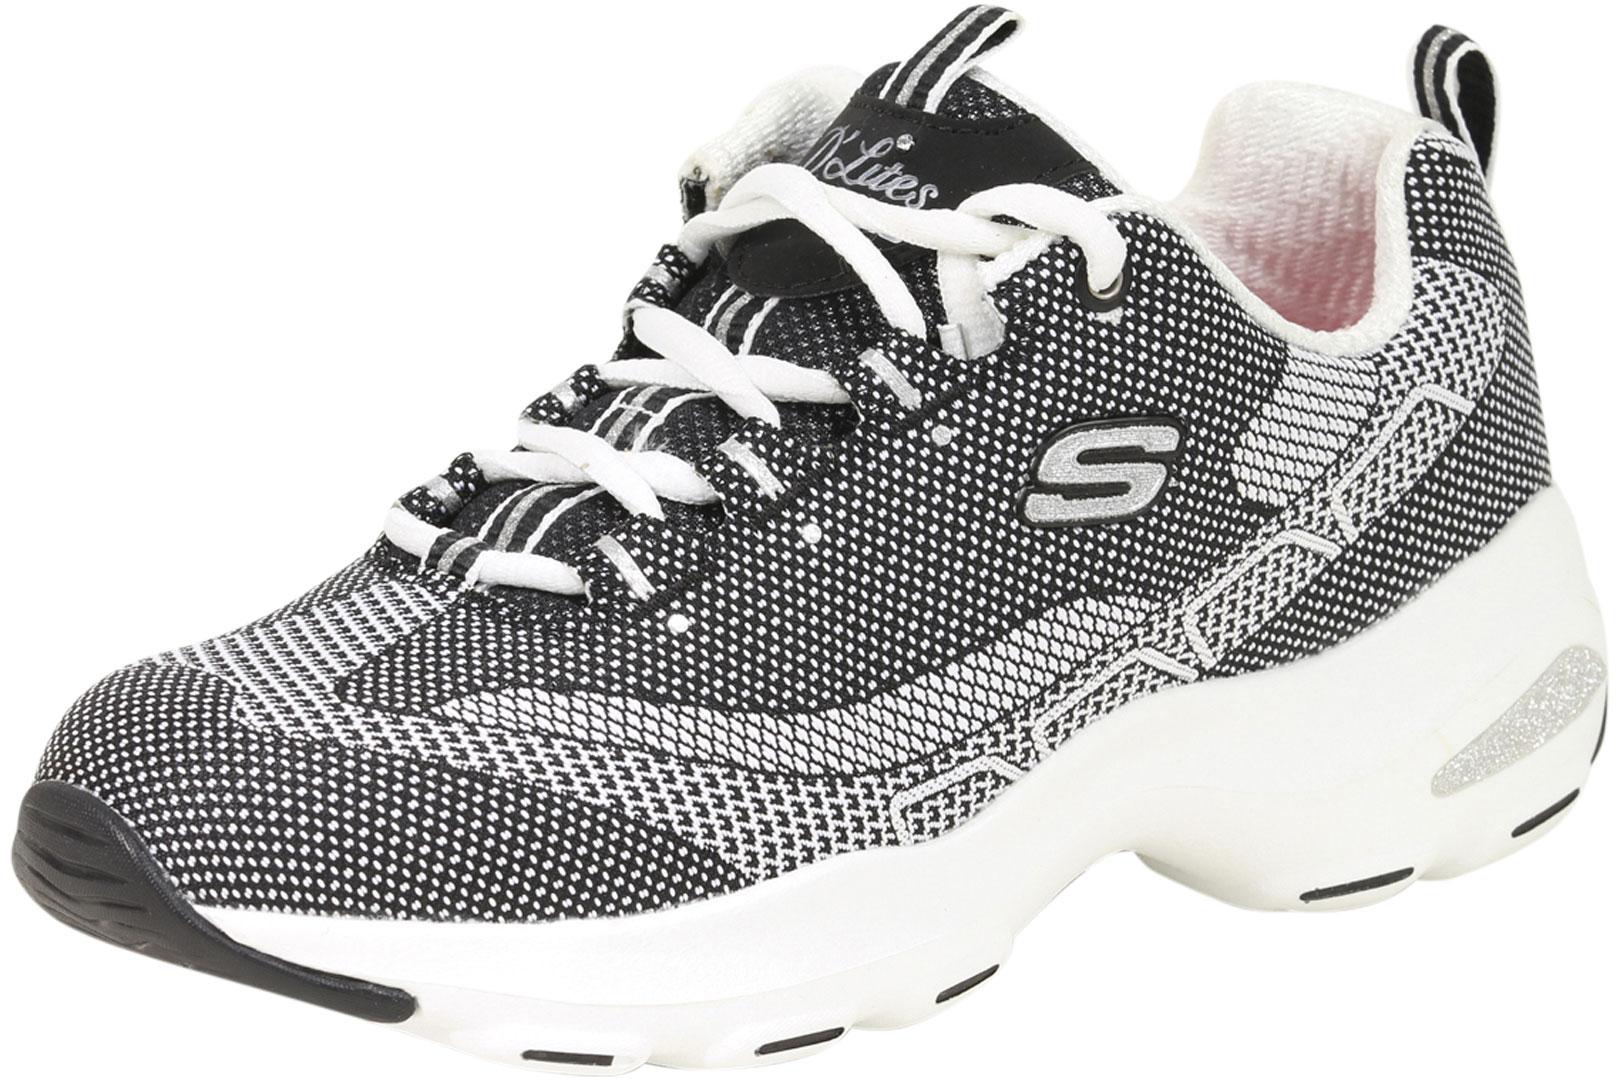 sketcher shoes for women